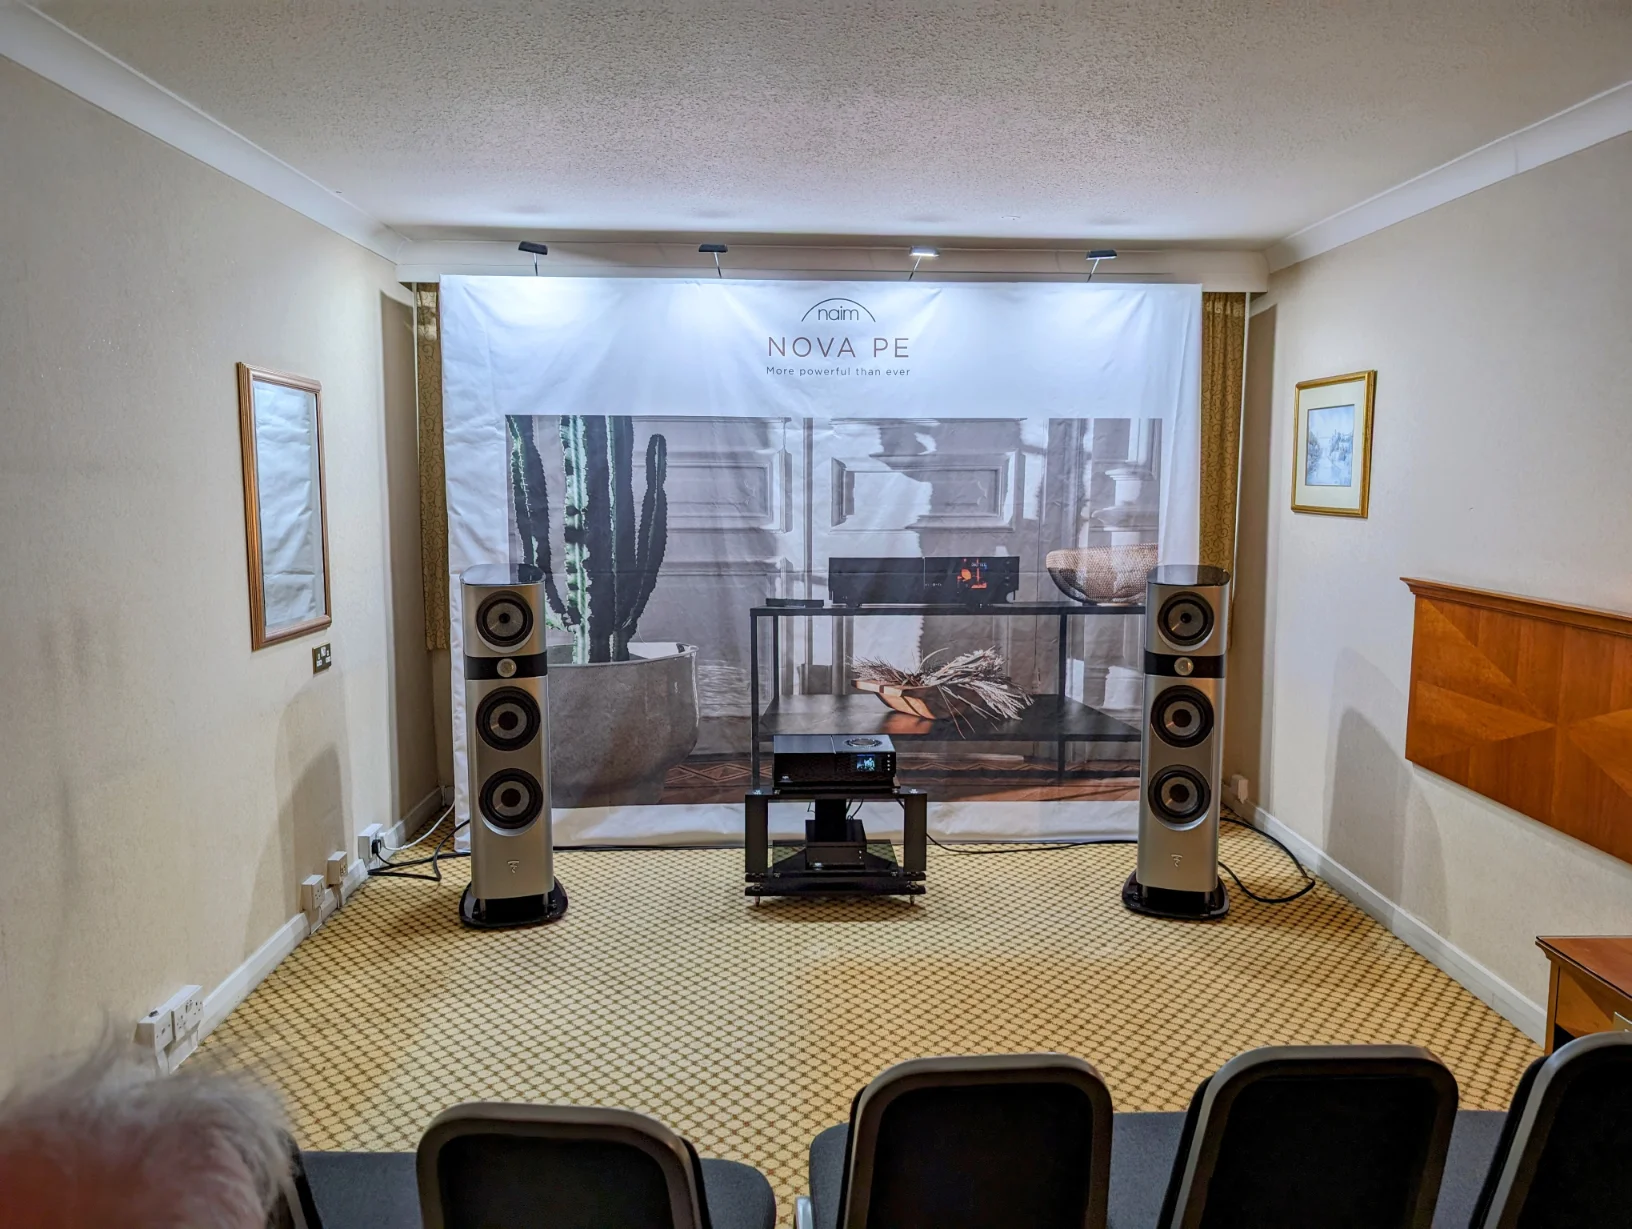 The newly launched Naim Nova PE was doing a stellar job driving the Focal Sopra 2. Simples